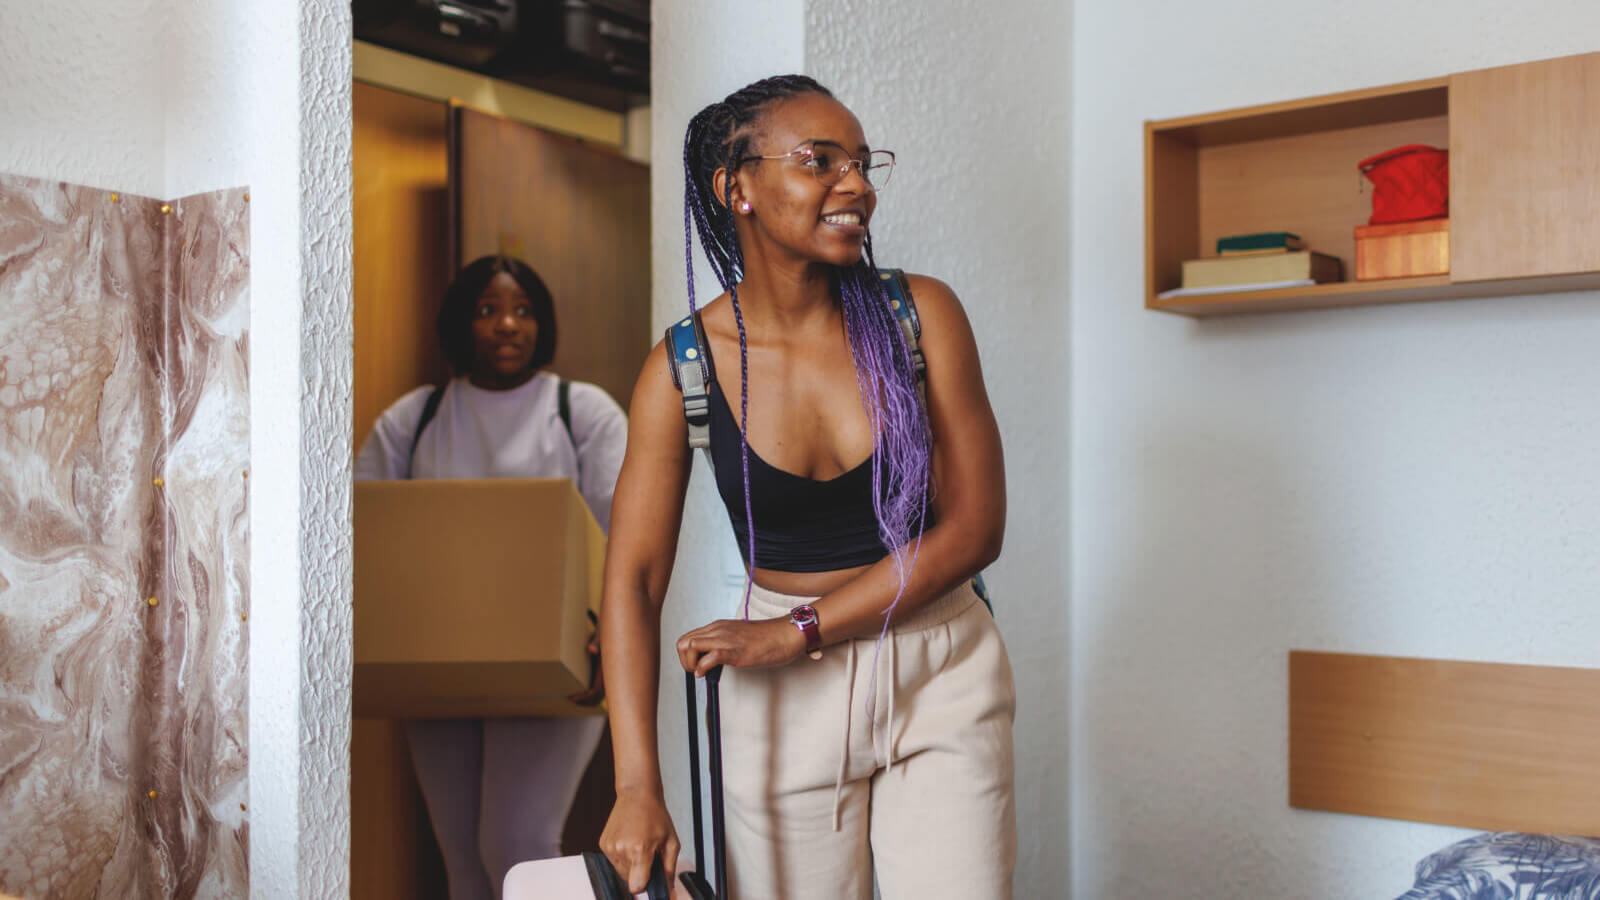 smiling young woman entering dorm room with suitcase